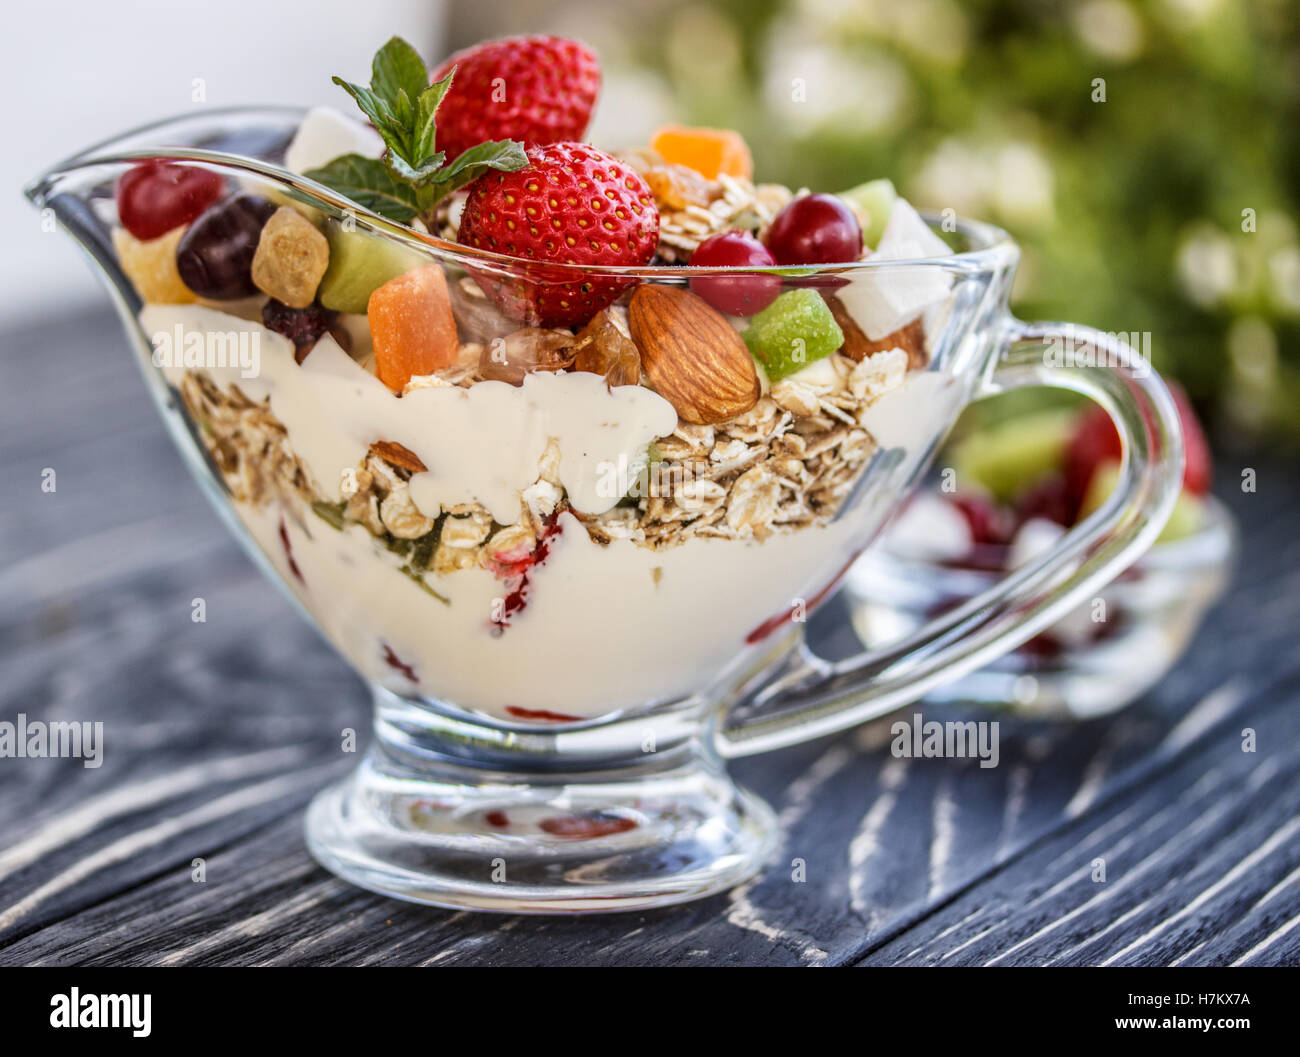 Fruit salad closeup with berries, yogurt and granola in a glass bowl on an old wooden board Stock Photo